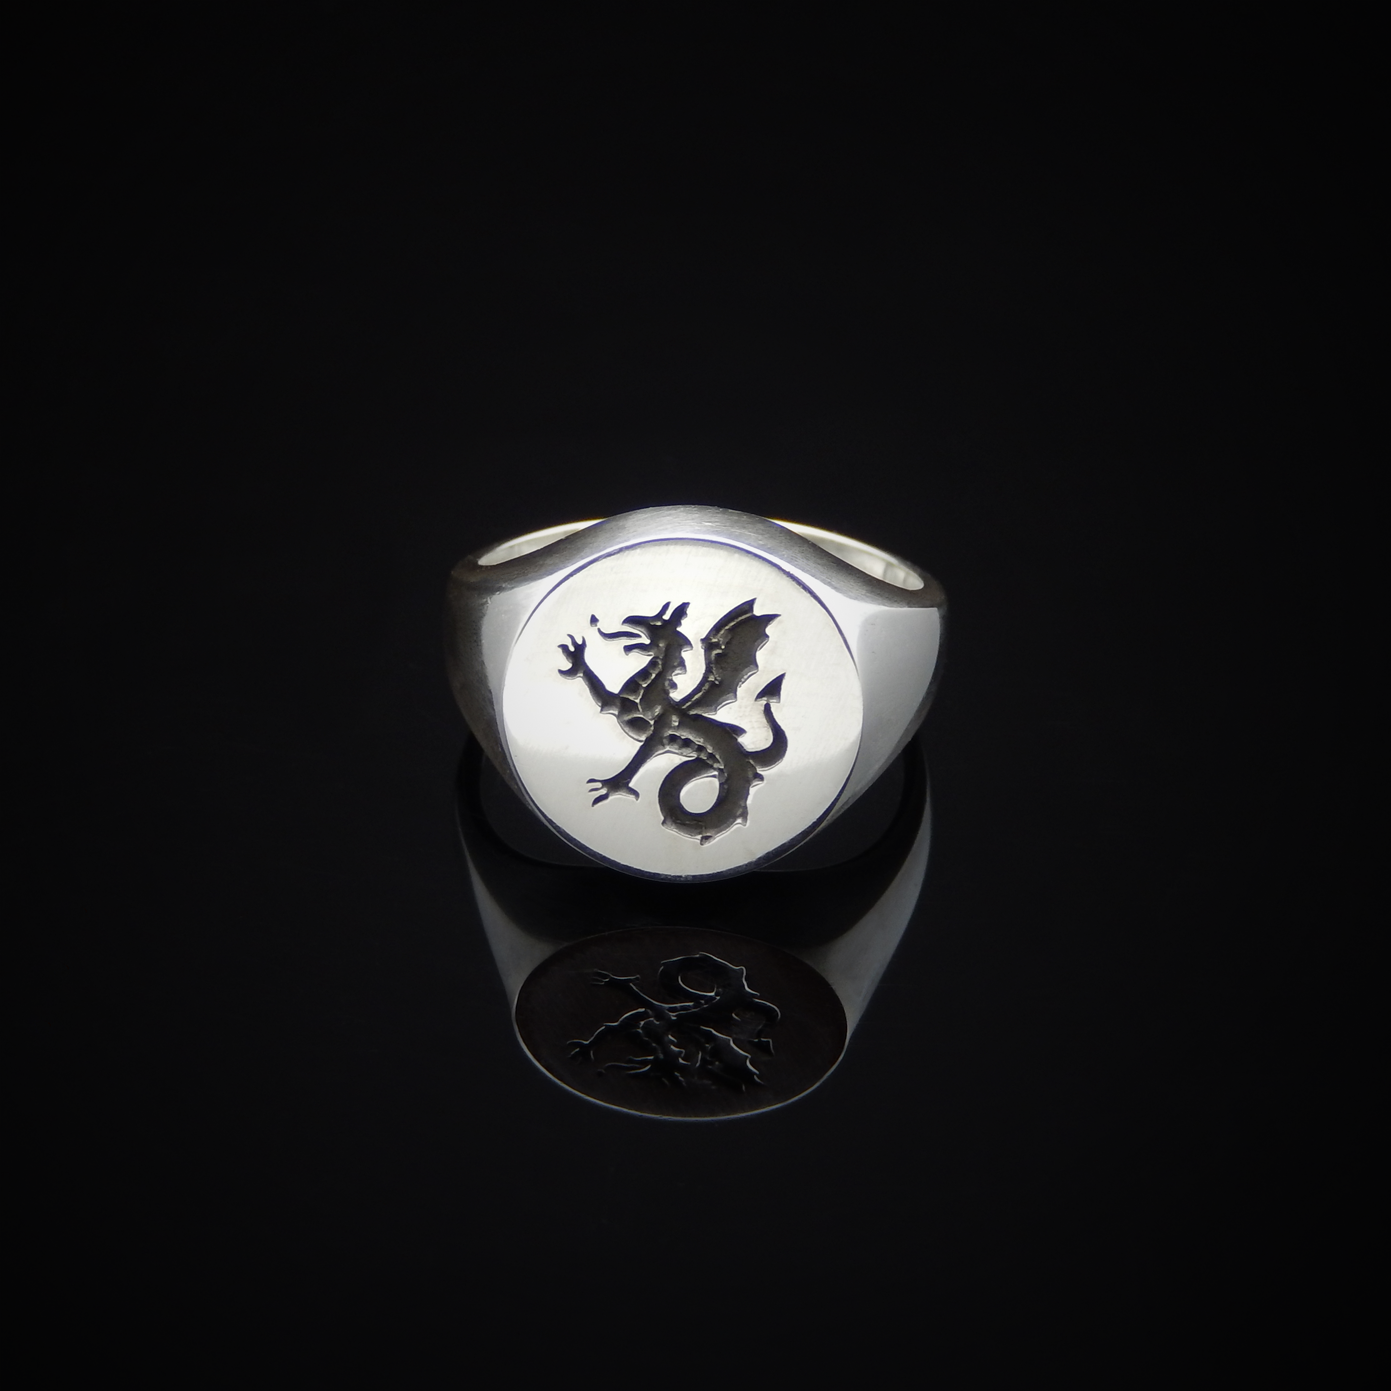 Sterling Silver Ring, Silver Ring Front View, Dragon Ring, Signet Ring, Historical Ring, Heraldry, Wyvern, Wyvern Ring,  White Gold Ring, Gold, Magic Ring, Fantasy Ring, Medieval Ring, English Ring, Rings for Him, Gifts for Him, Mens Signet Ring